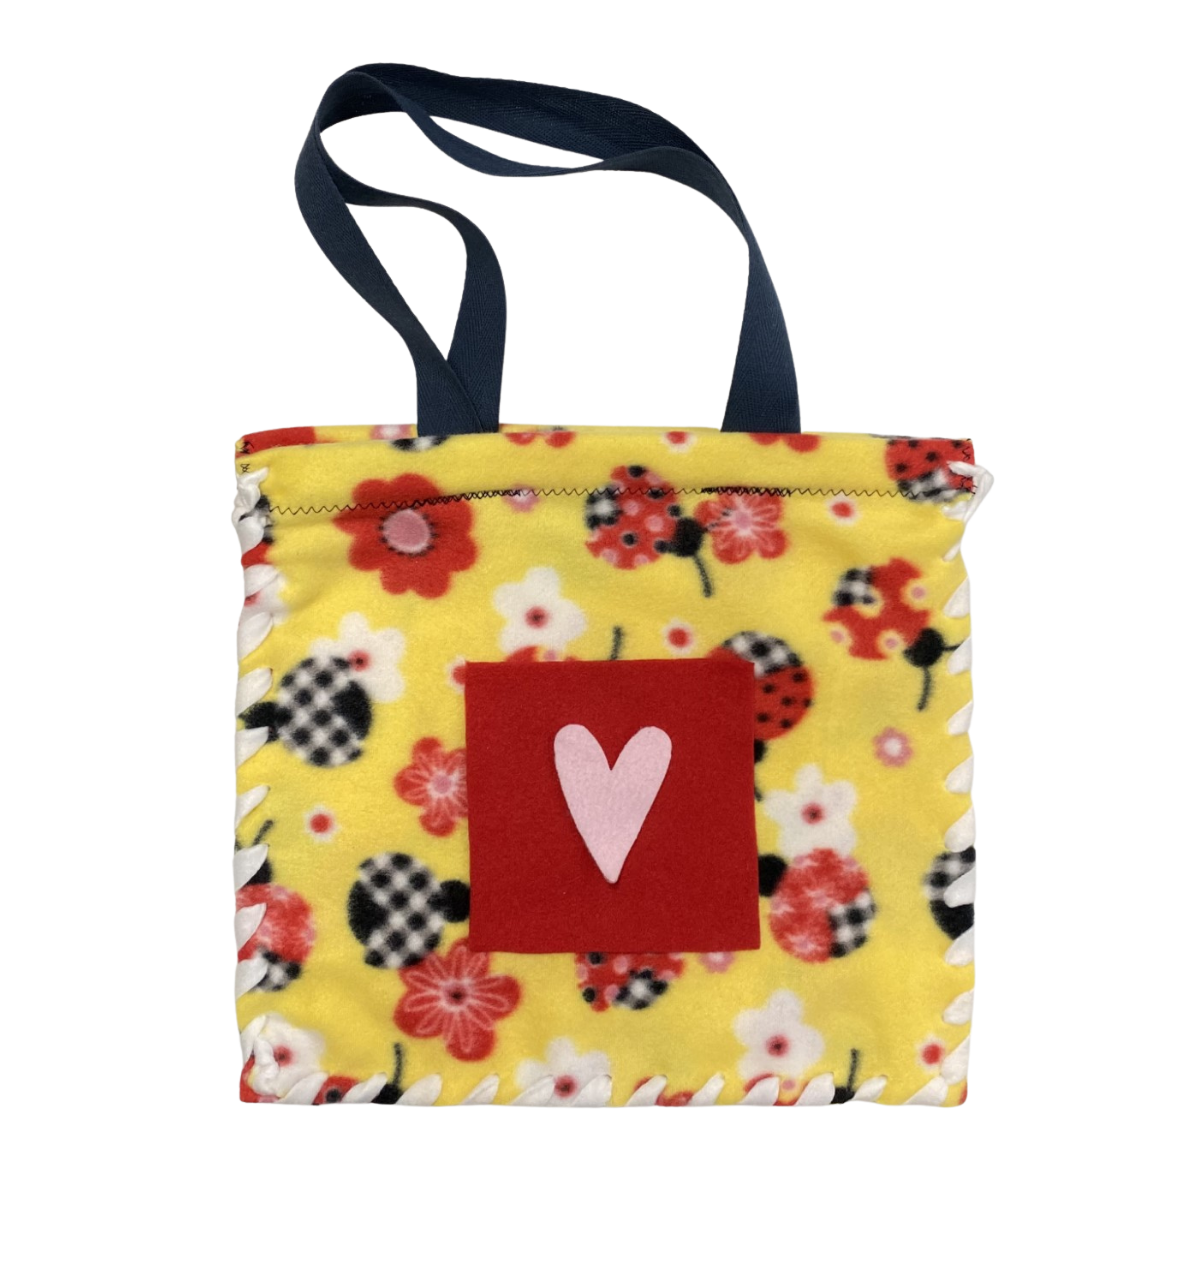 Fleece tote bag Valentine Edition made with Yellow, Red, Black and White Lady Bug Fleece Pattern, front has 5 inch pocket in center with pink heart